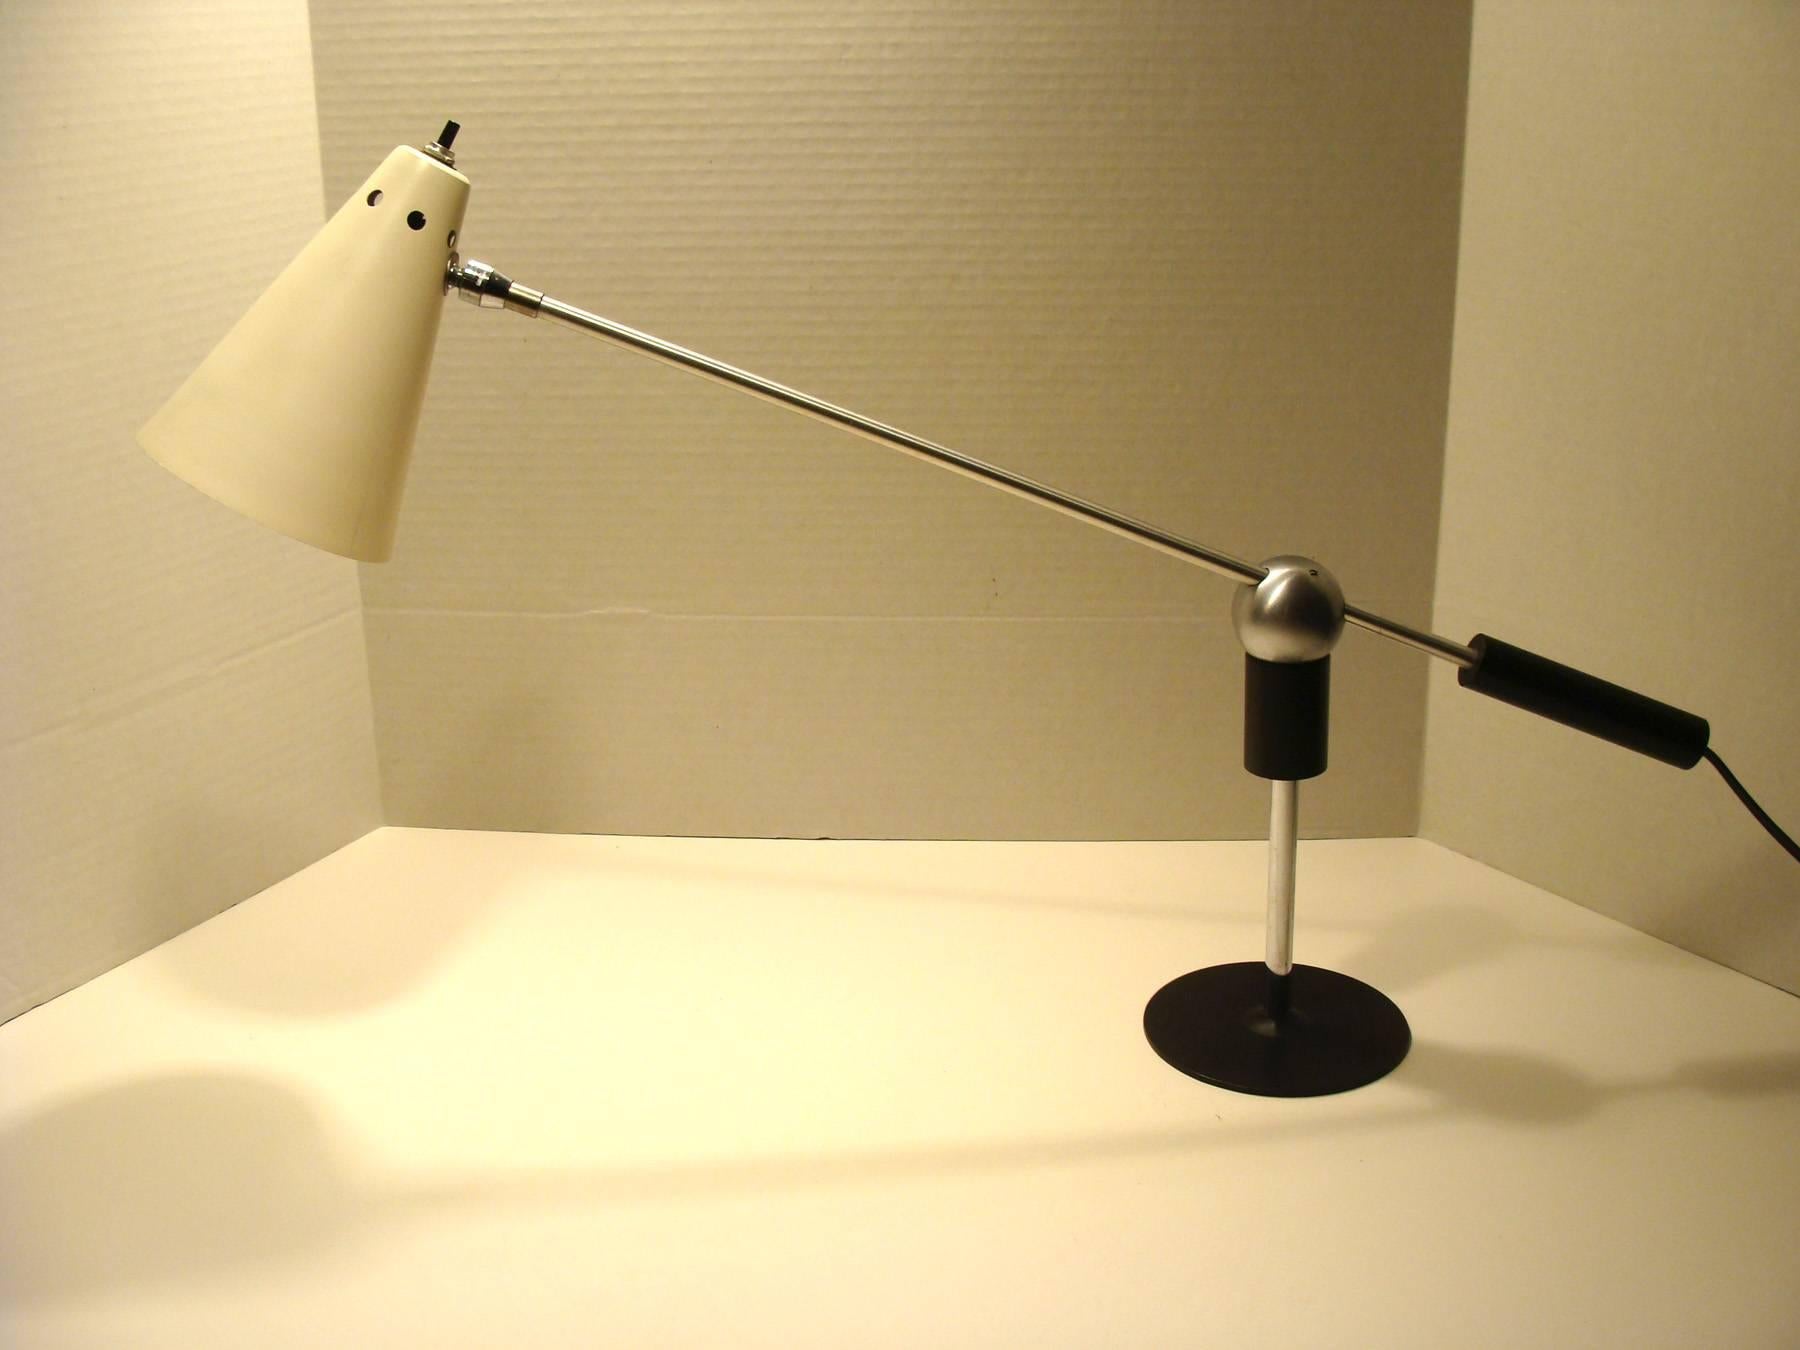 Iconic Mid-Century table/desk lamp designed by Gilbert Watrous
for Heifetz. Enameled white aluminum conical shade and brushed steel
magnetic ball and armature.
Measures: Arm length is 23